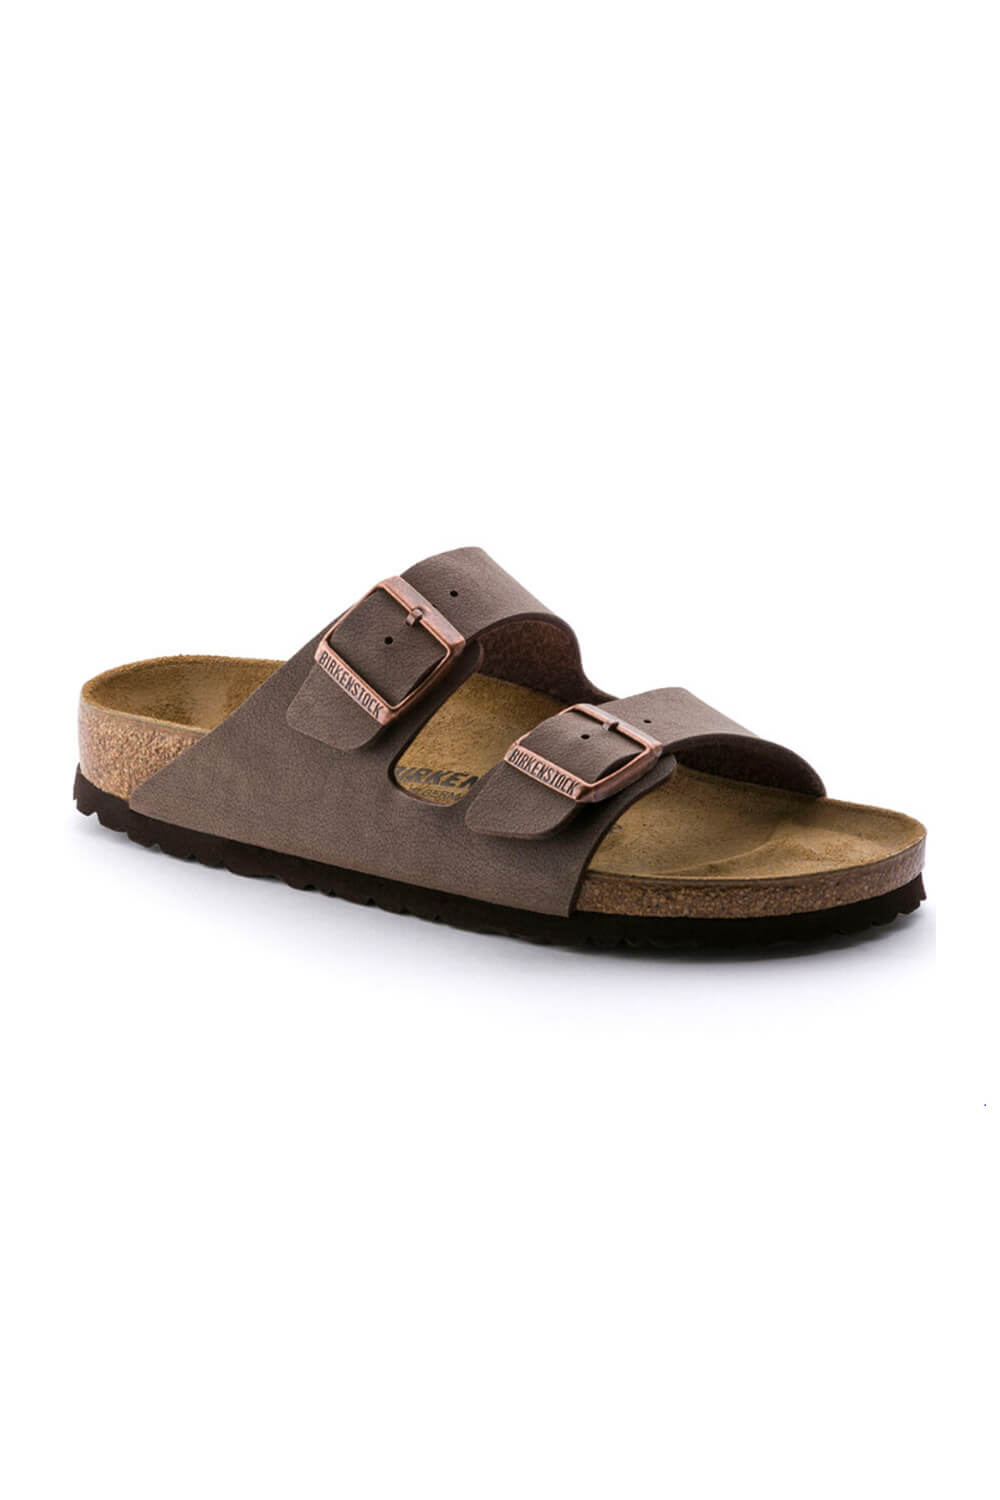 Birkenstock Sandals Are on Sale at Gilt This Weekend